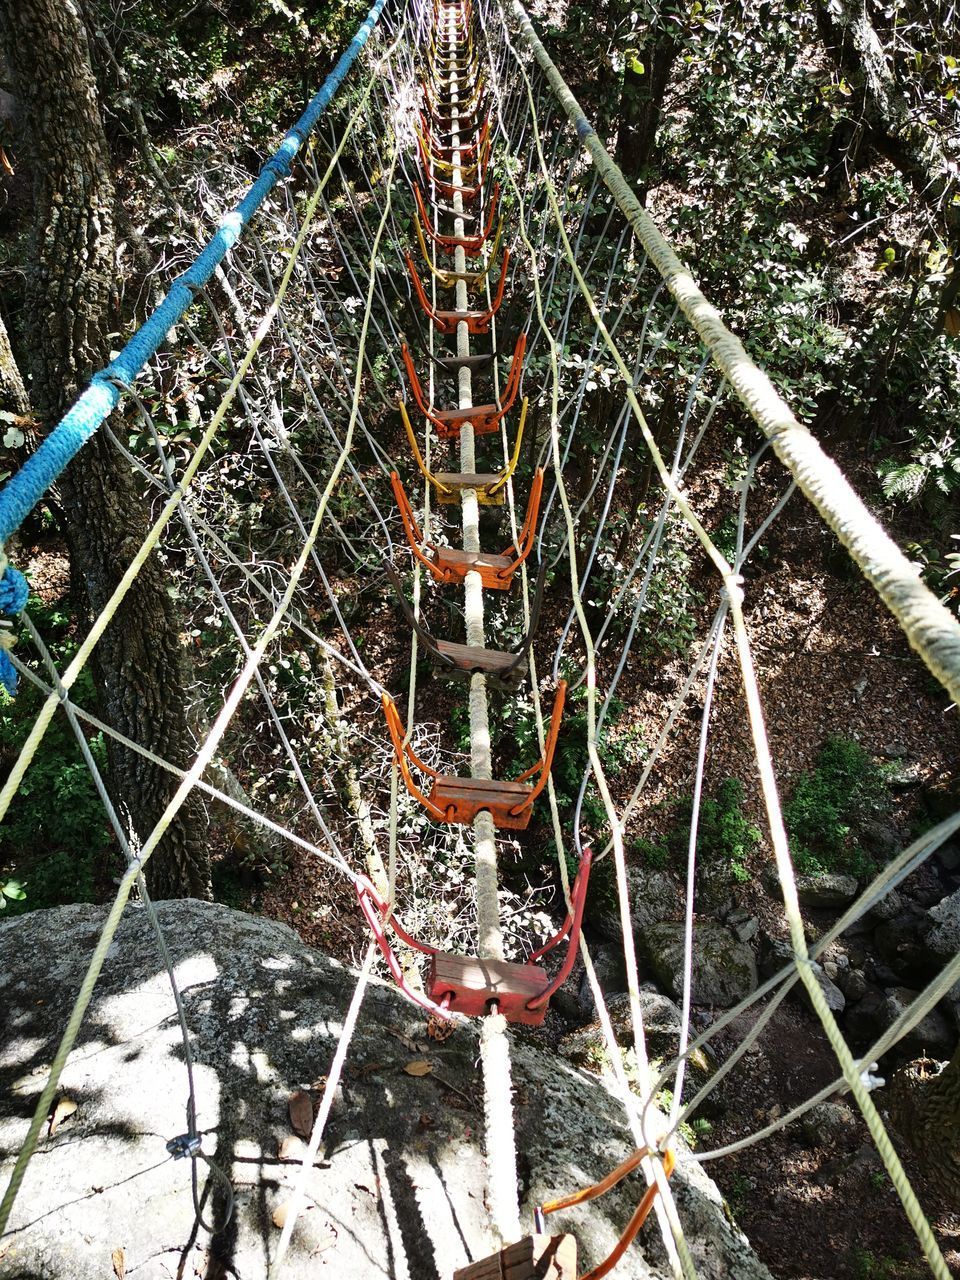 HIGH ANGLE VIEW OF CHAIN SWING RIDE IN PARK